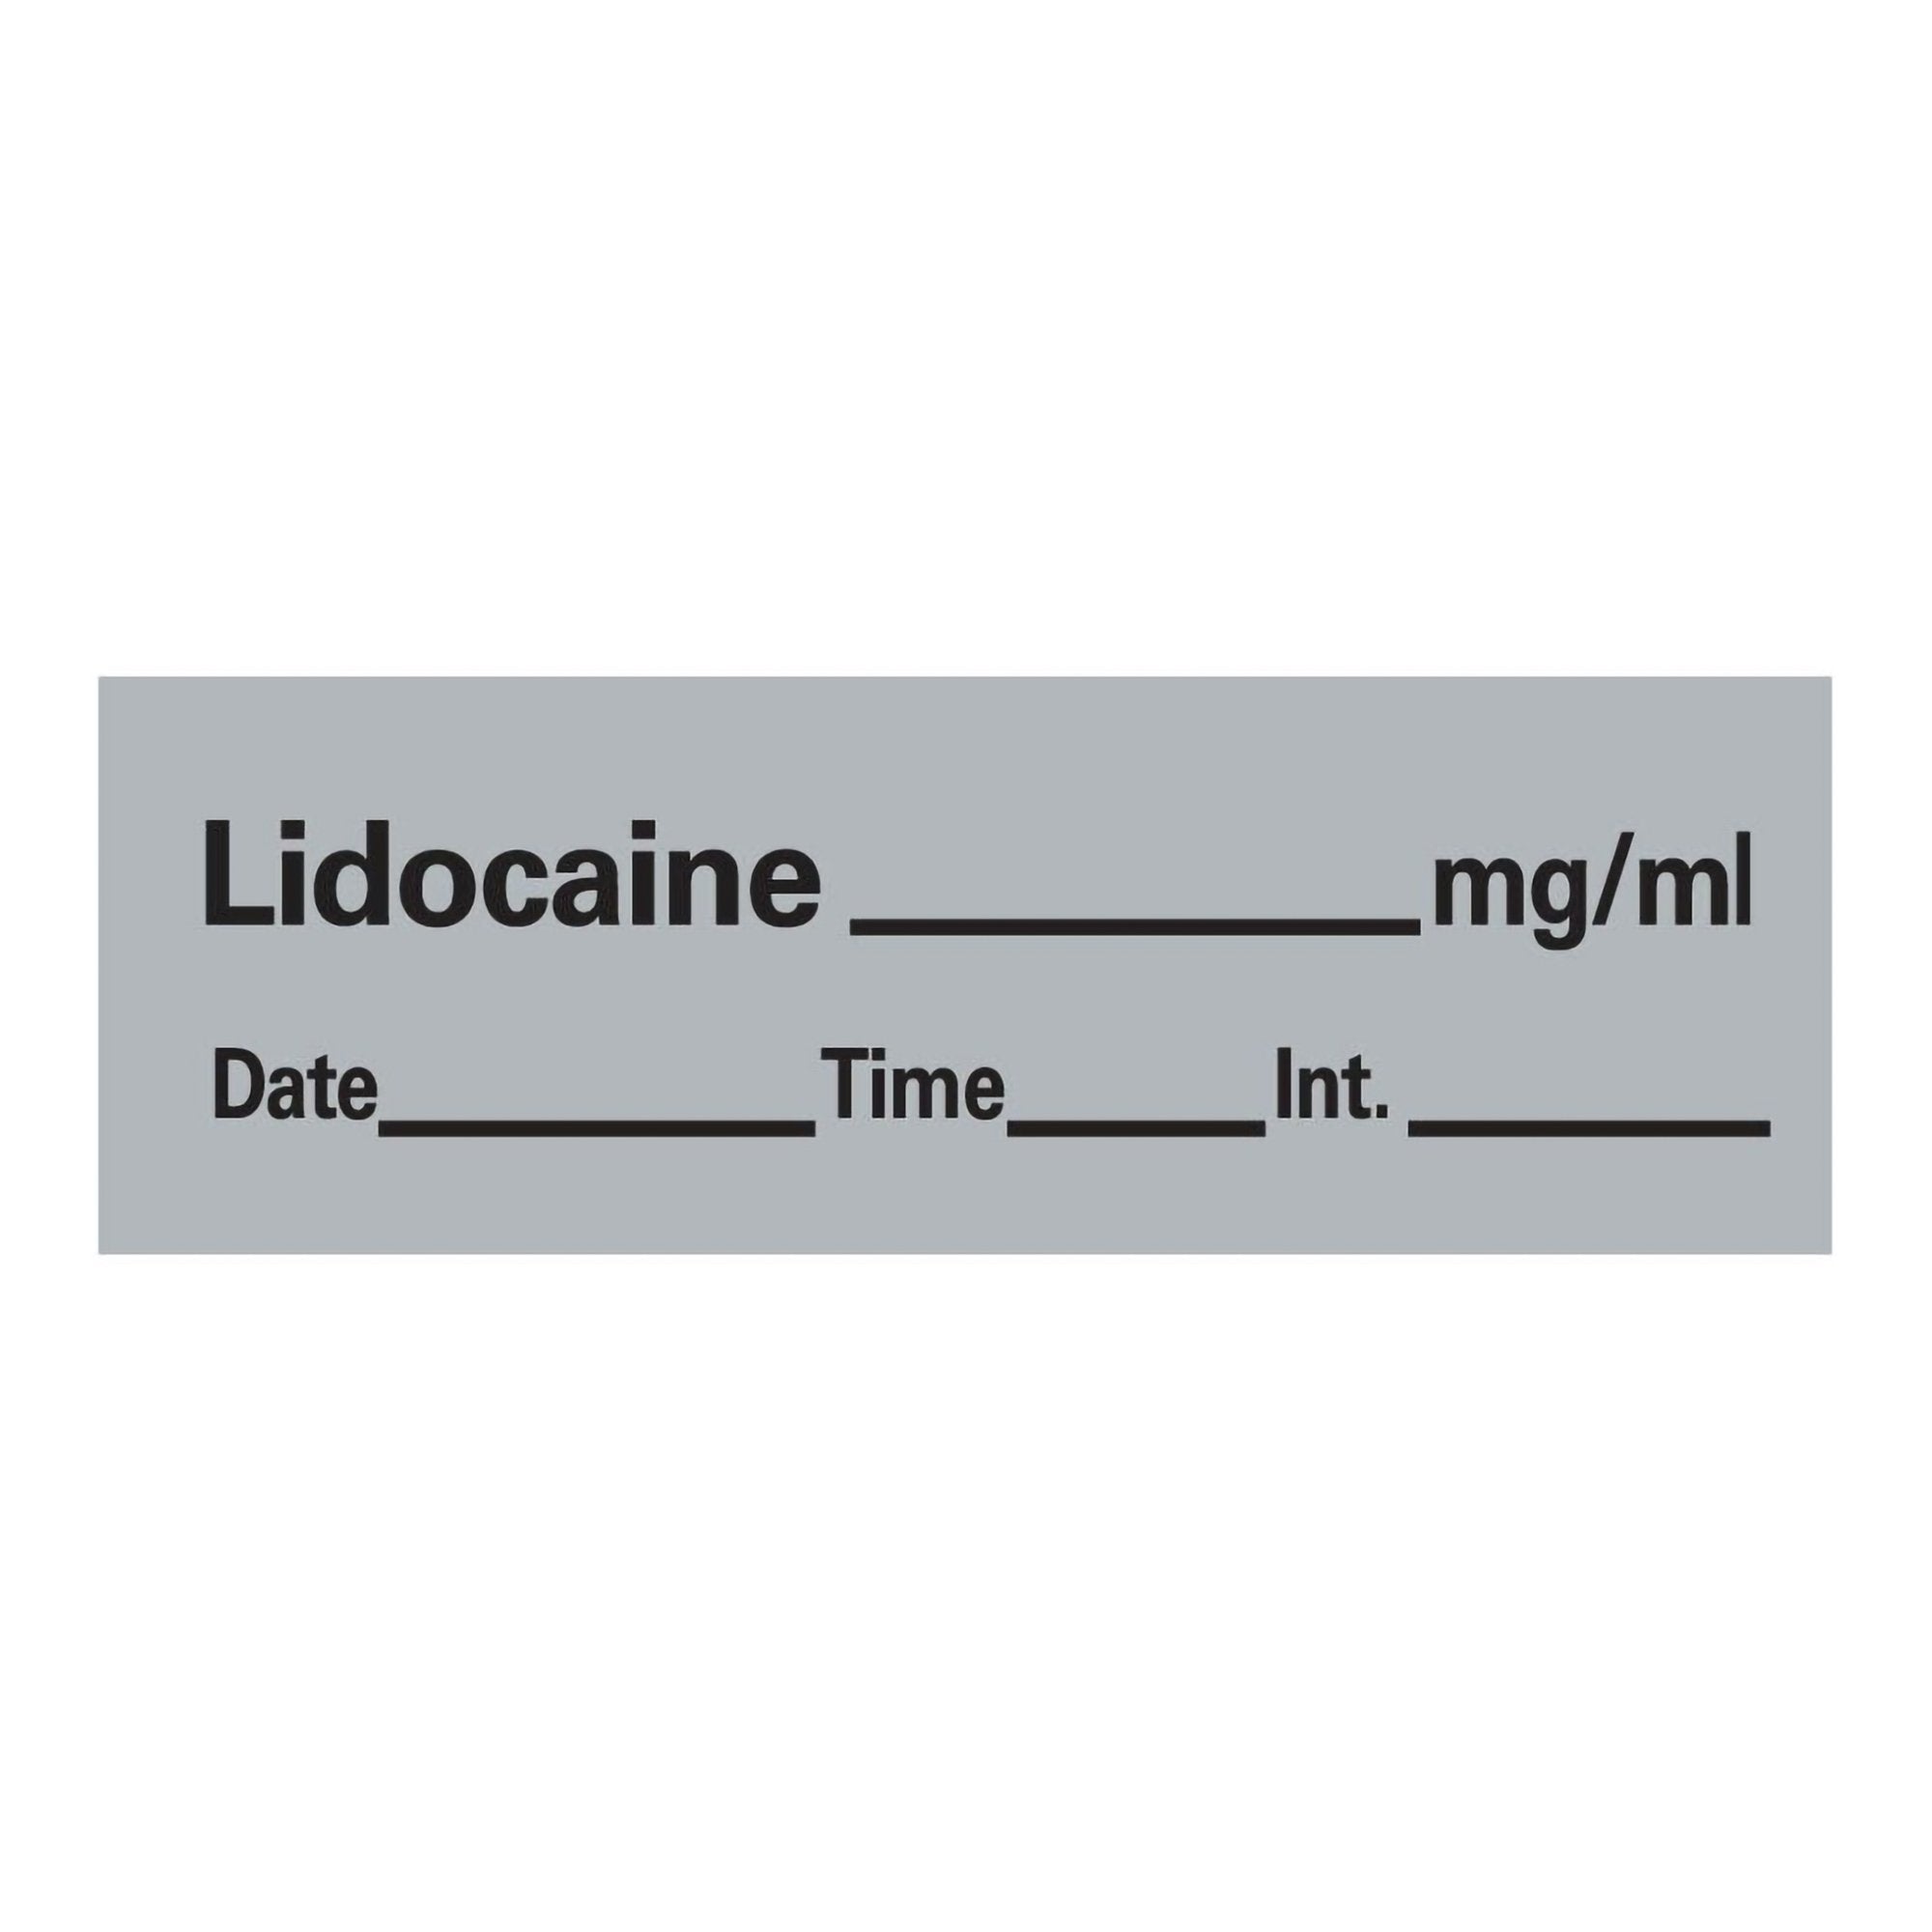 Drug Label Timemed Anesthesia Label Tape Lidocaine_mg/mL Date_Time_Int Gray 1/2 X 1-1/2 Inch